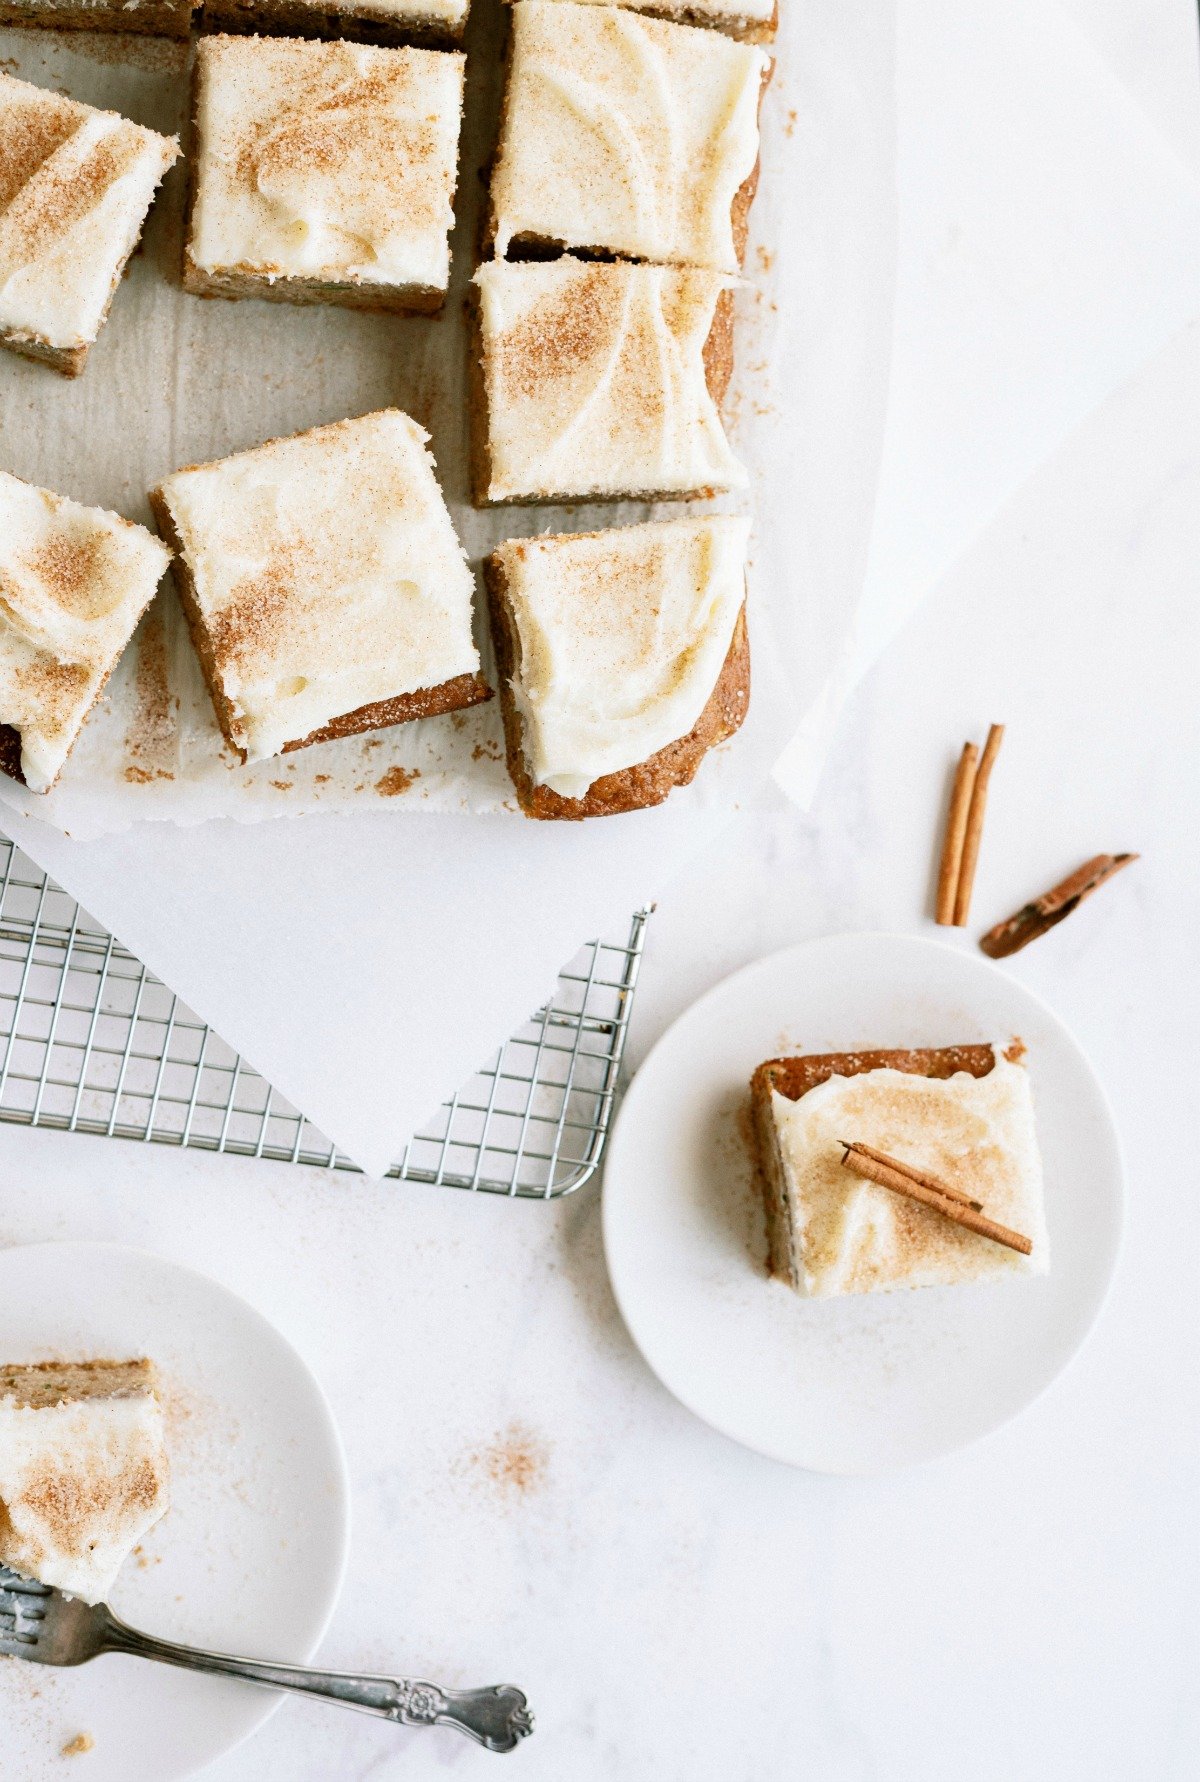 Cinnamon Zucchini Cake with Cream Cheese Frosting sliced into squares. One slice on a white plate